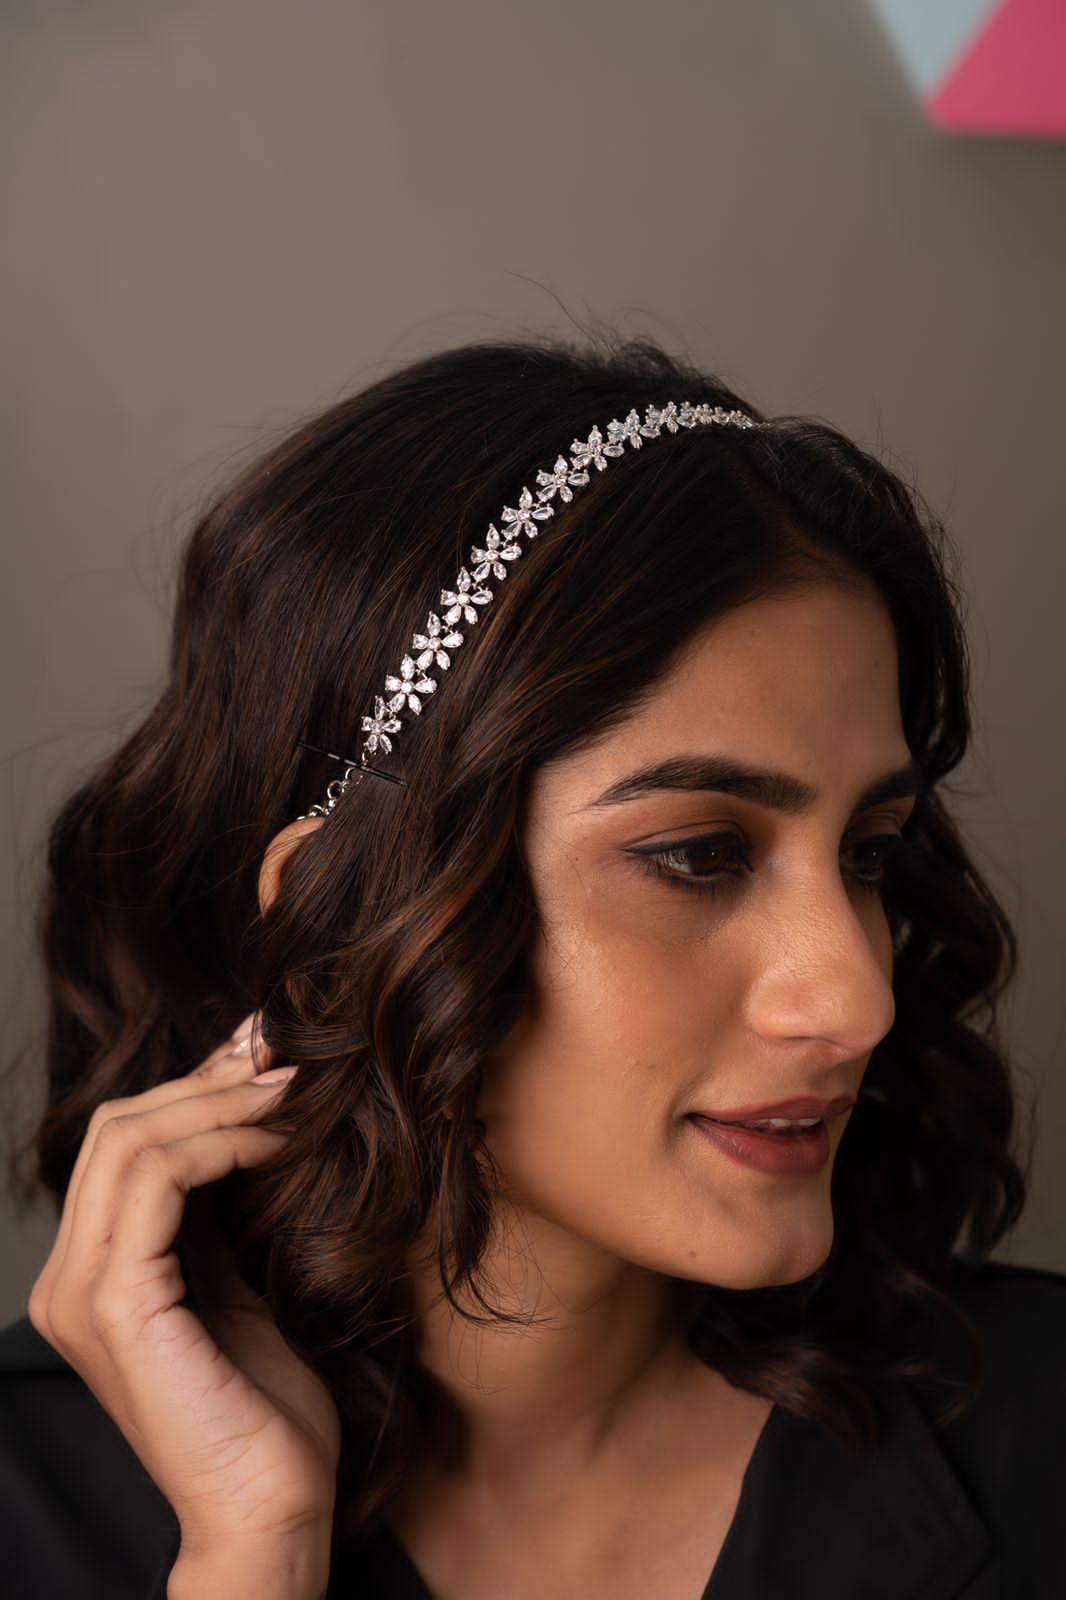 5 bejewelled hair accessories to bling up any bad hair day